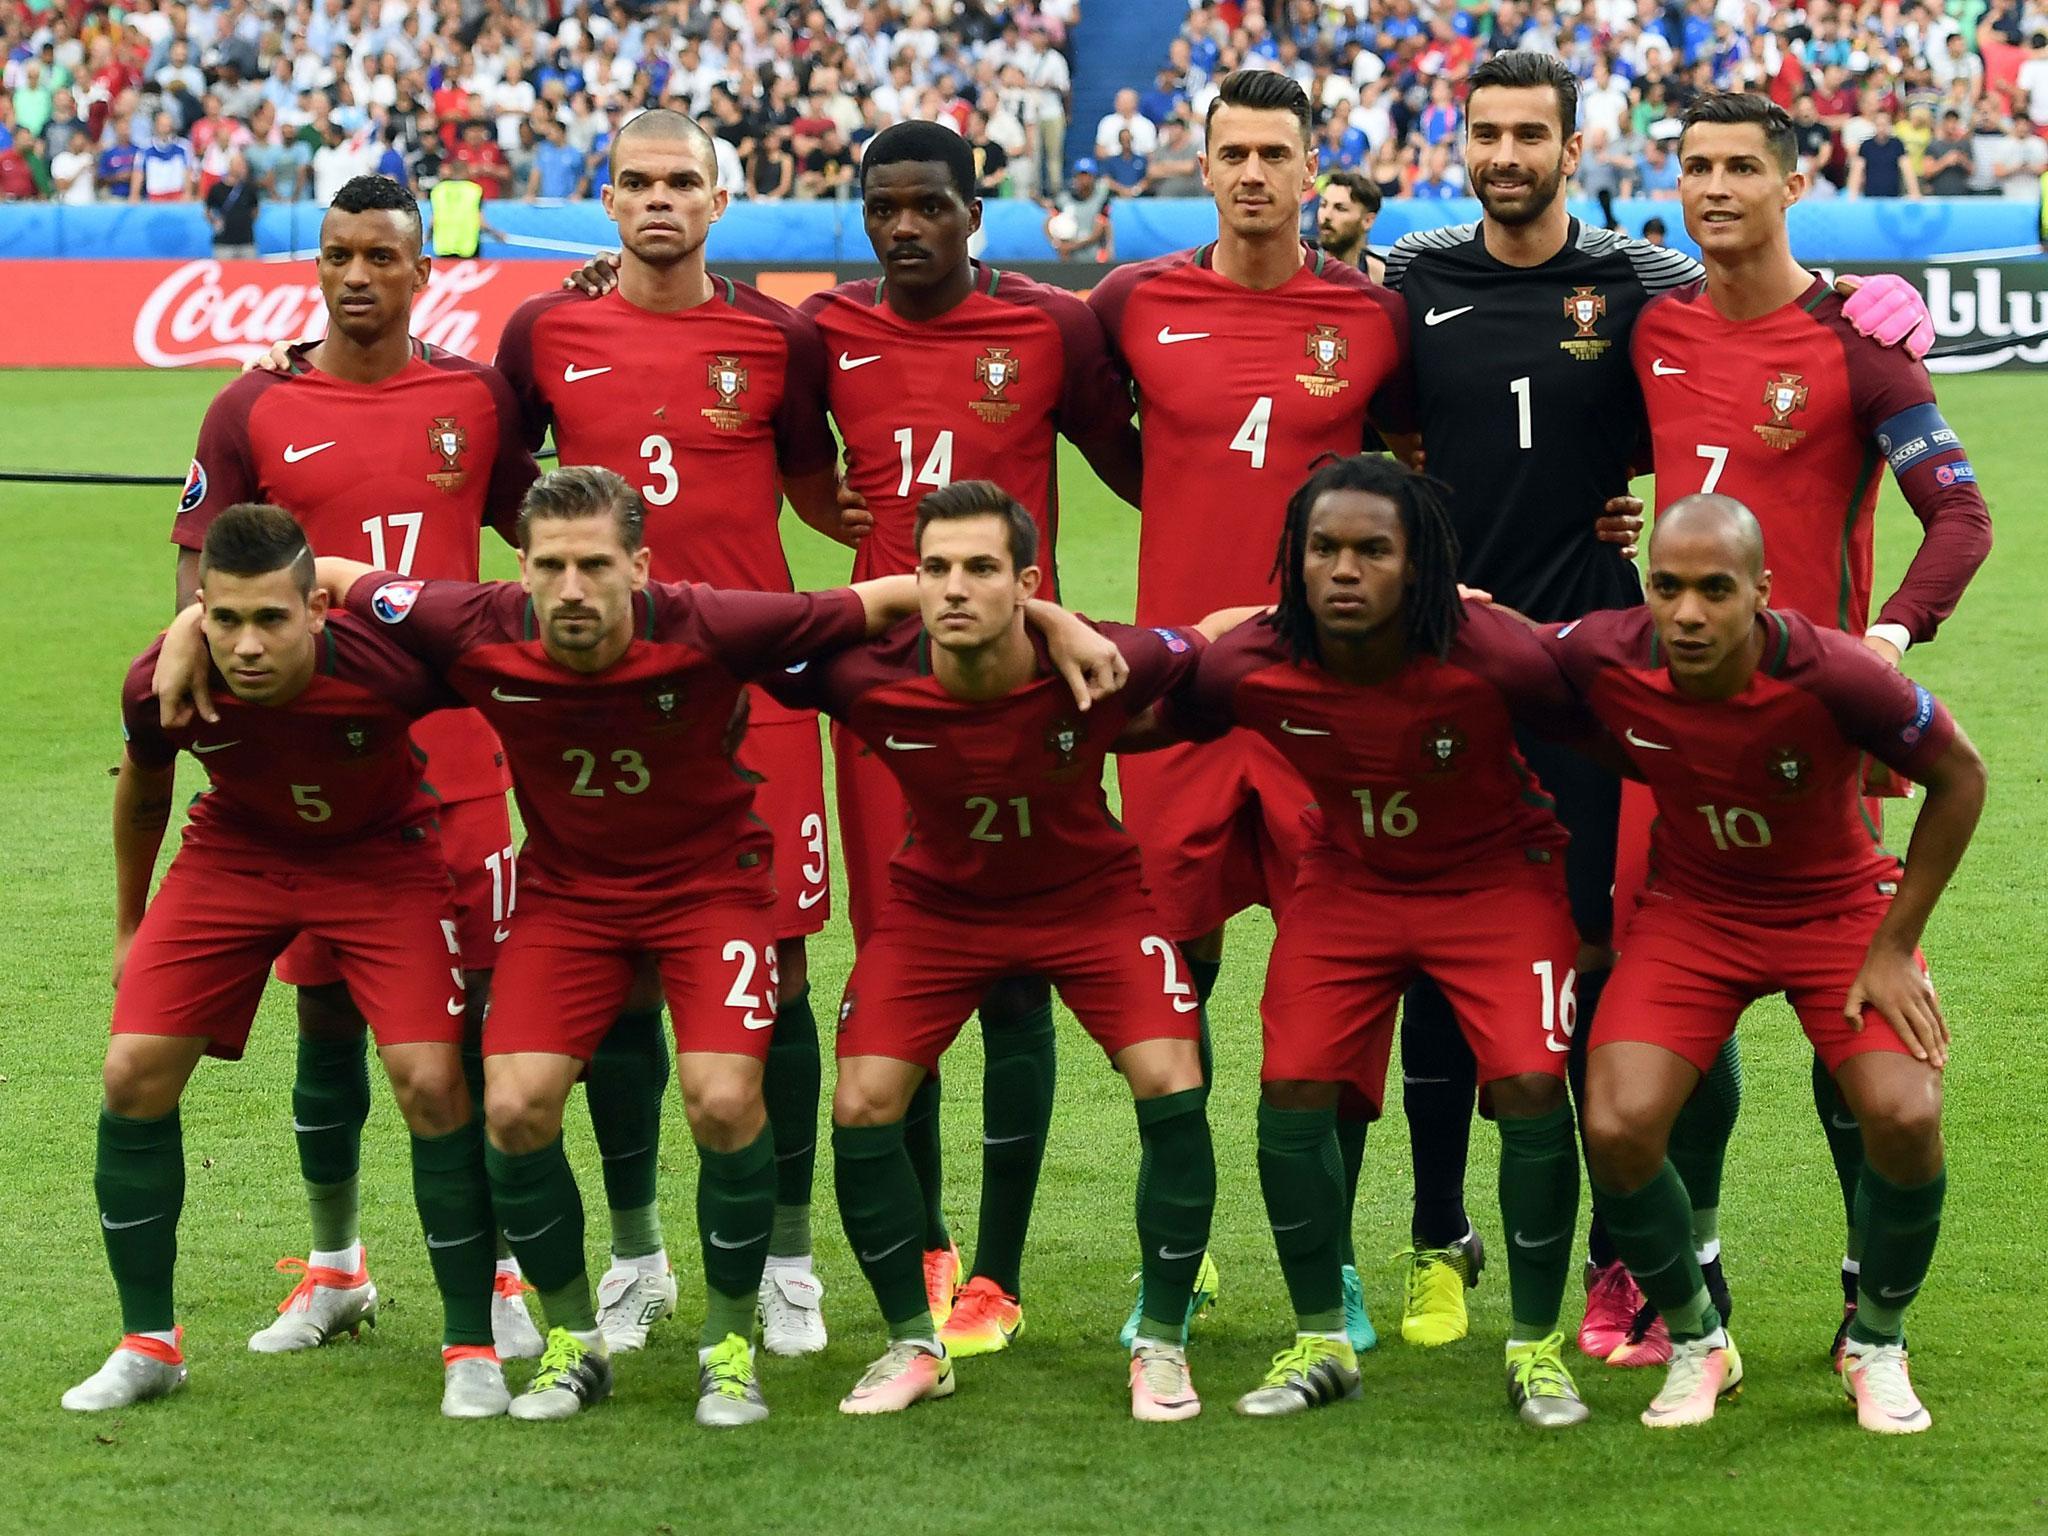 Portugal vs France player ratings: Who was the star man as